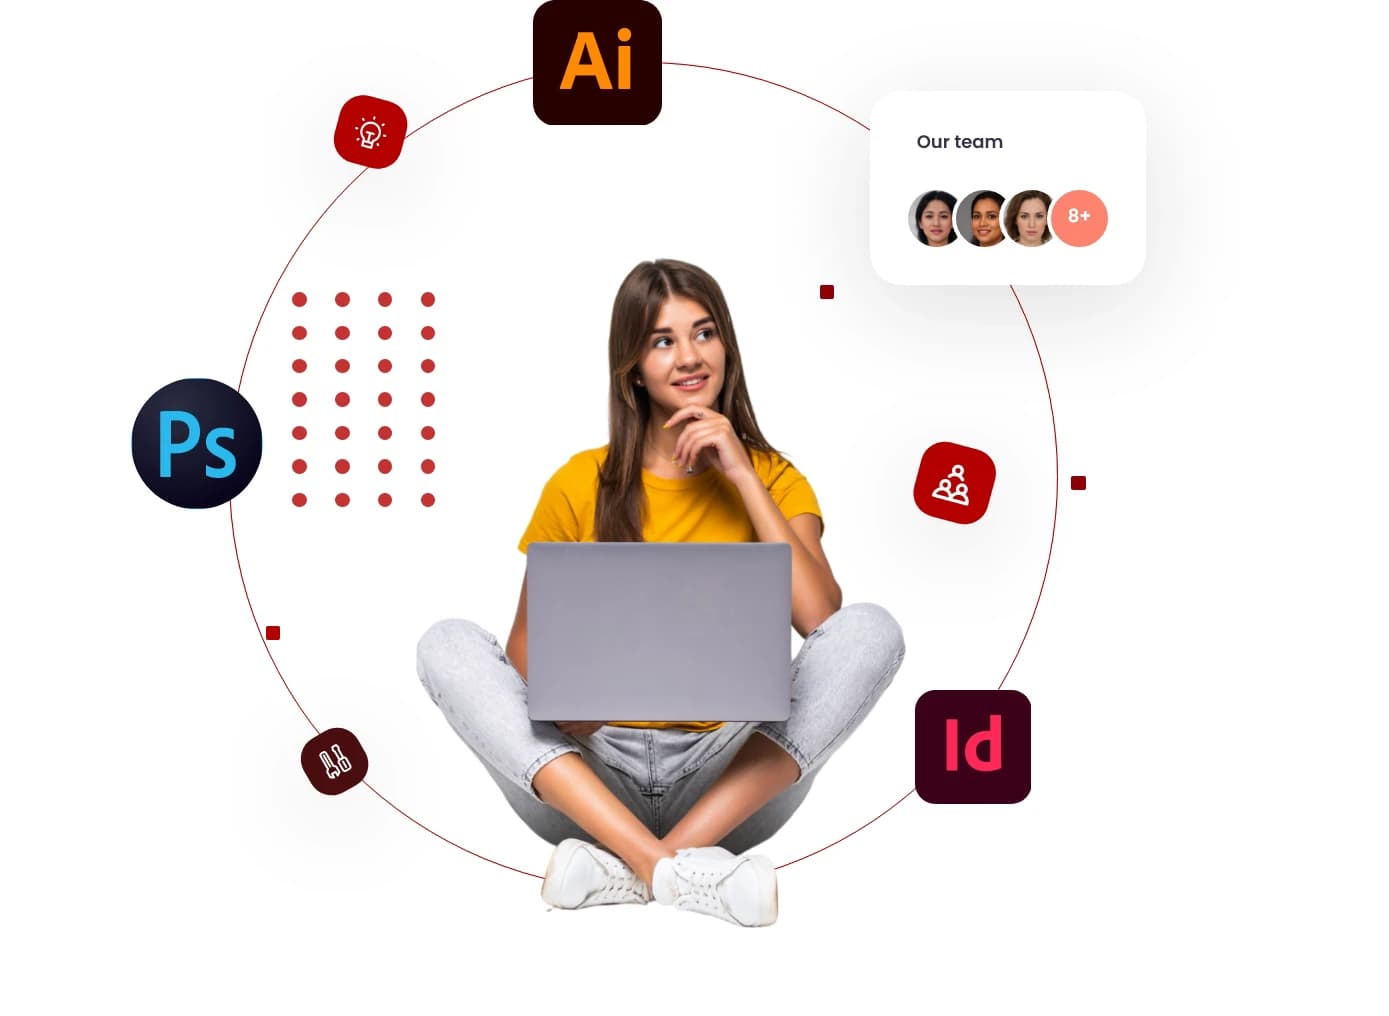 Adobe Photoshop, Illustrator, InDesign, and other industry-standard software training, typography, color theory, layout design, logo design, web design, and motion graphics.